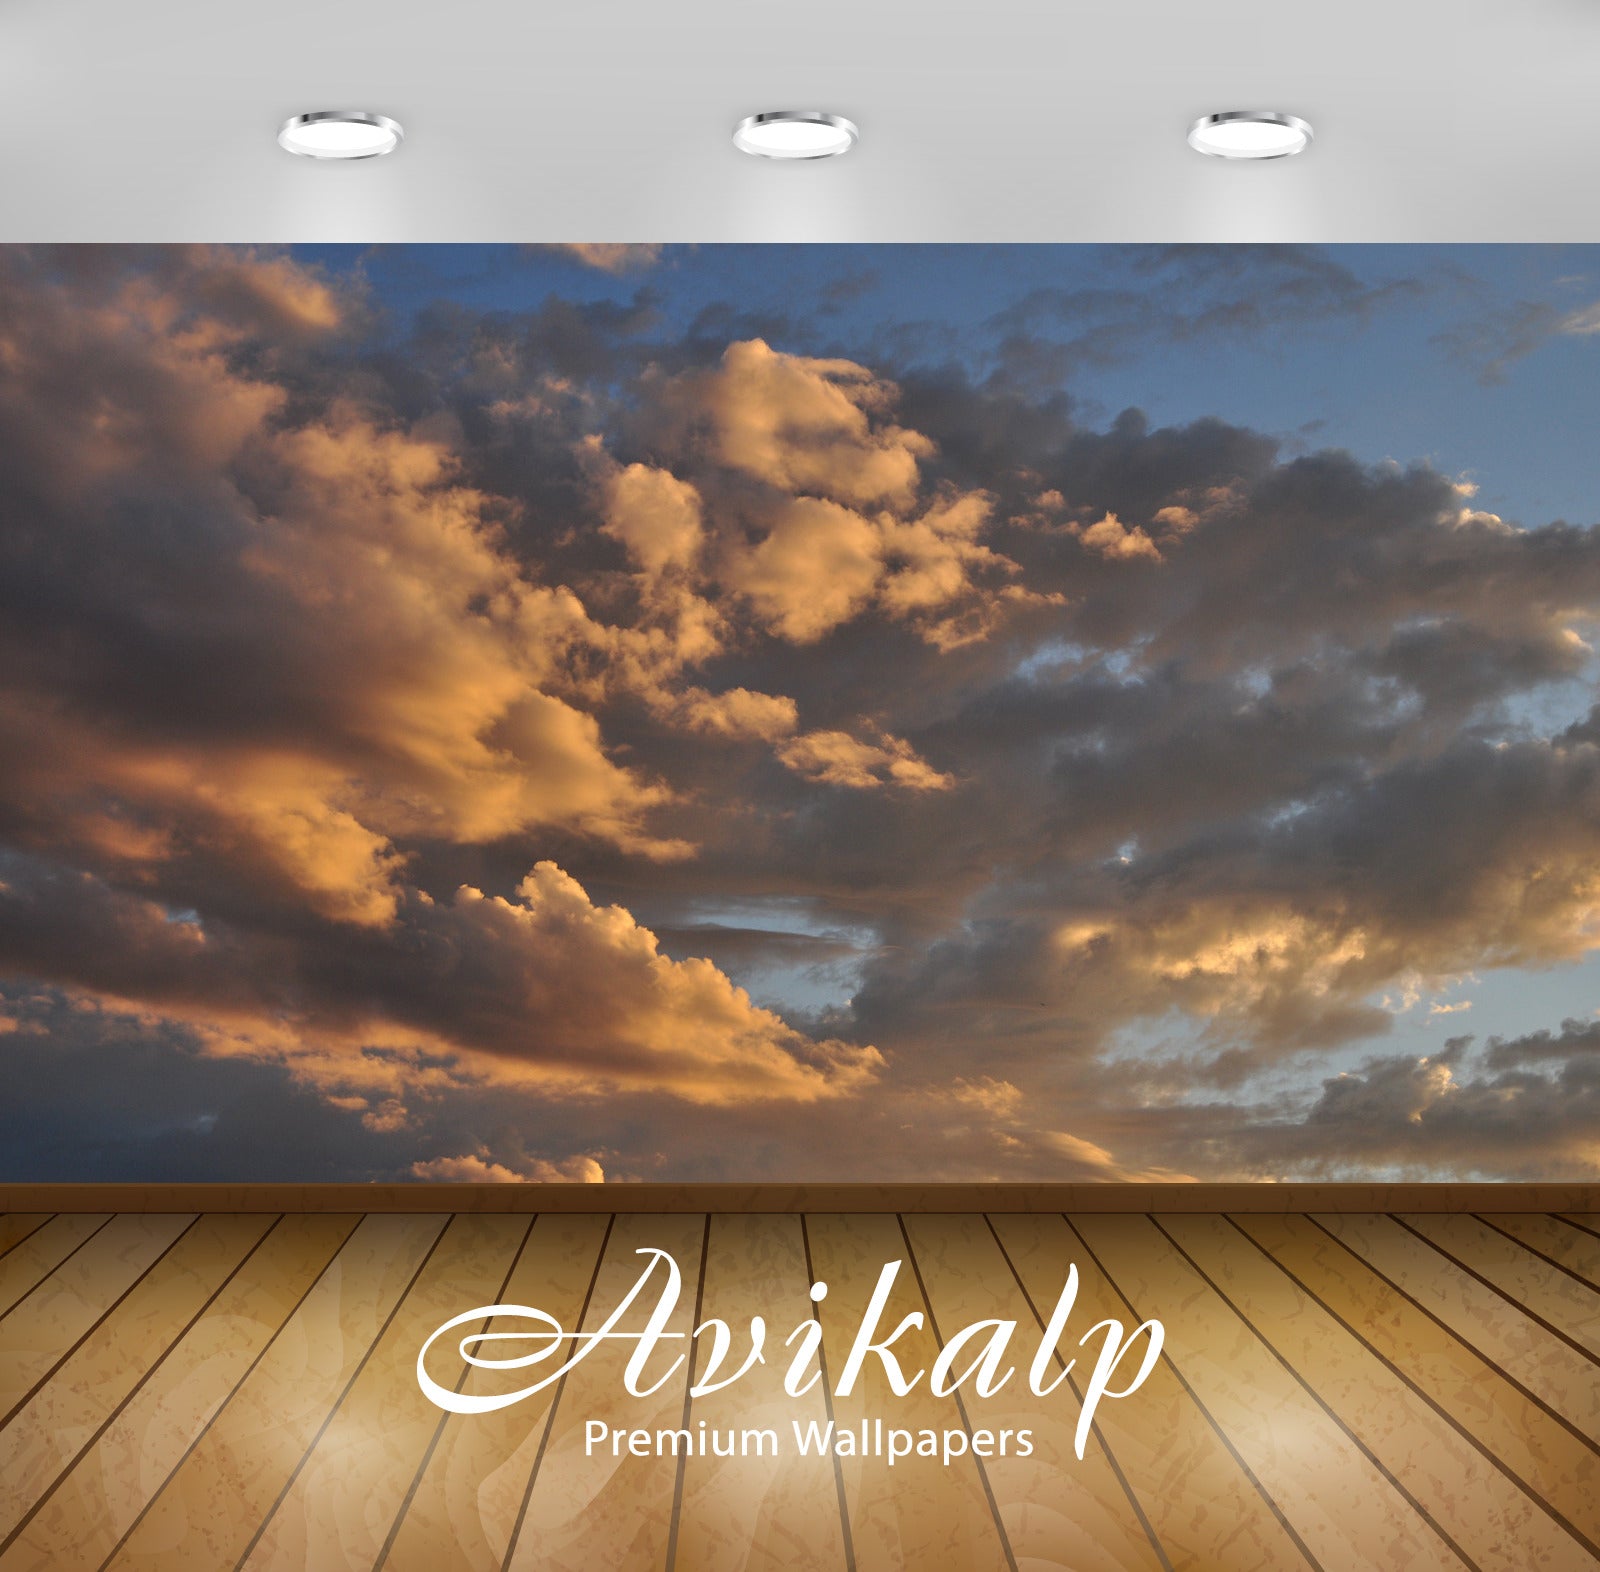 Avikalp Exclusive Awi1873 Dark Clouds Full HD Wallpapers for Living room, Hall, Kids Room, Kitchen,